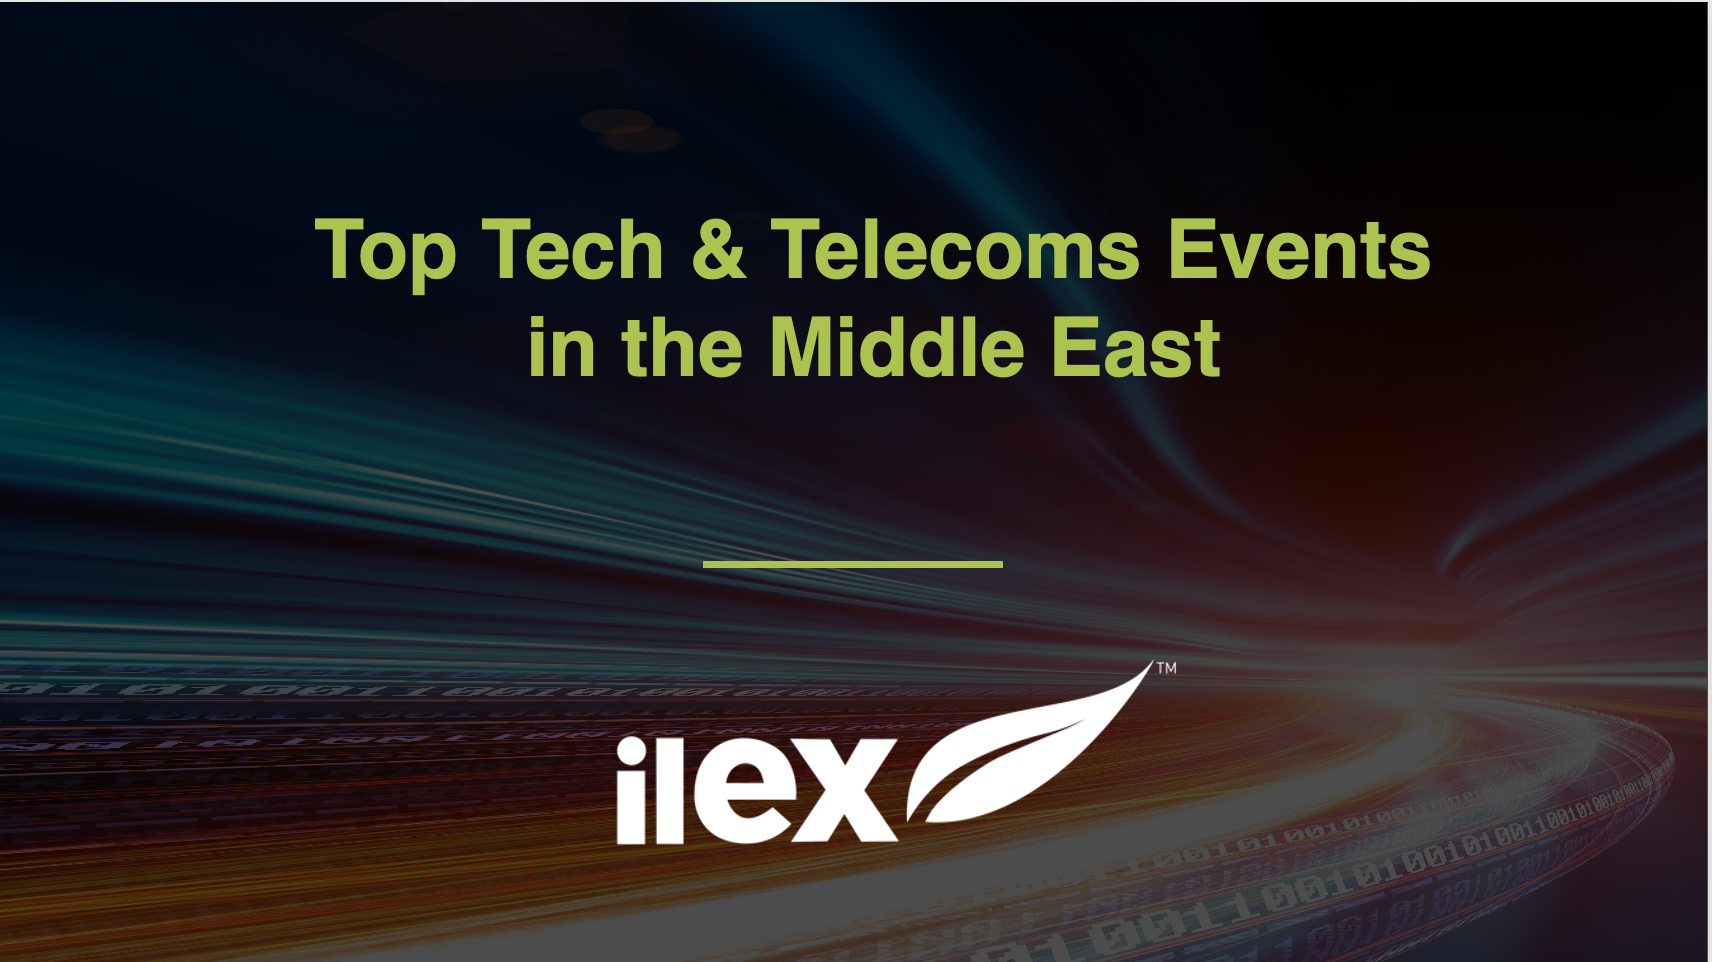 Top Tech & Telecoms Events in the Middle East